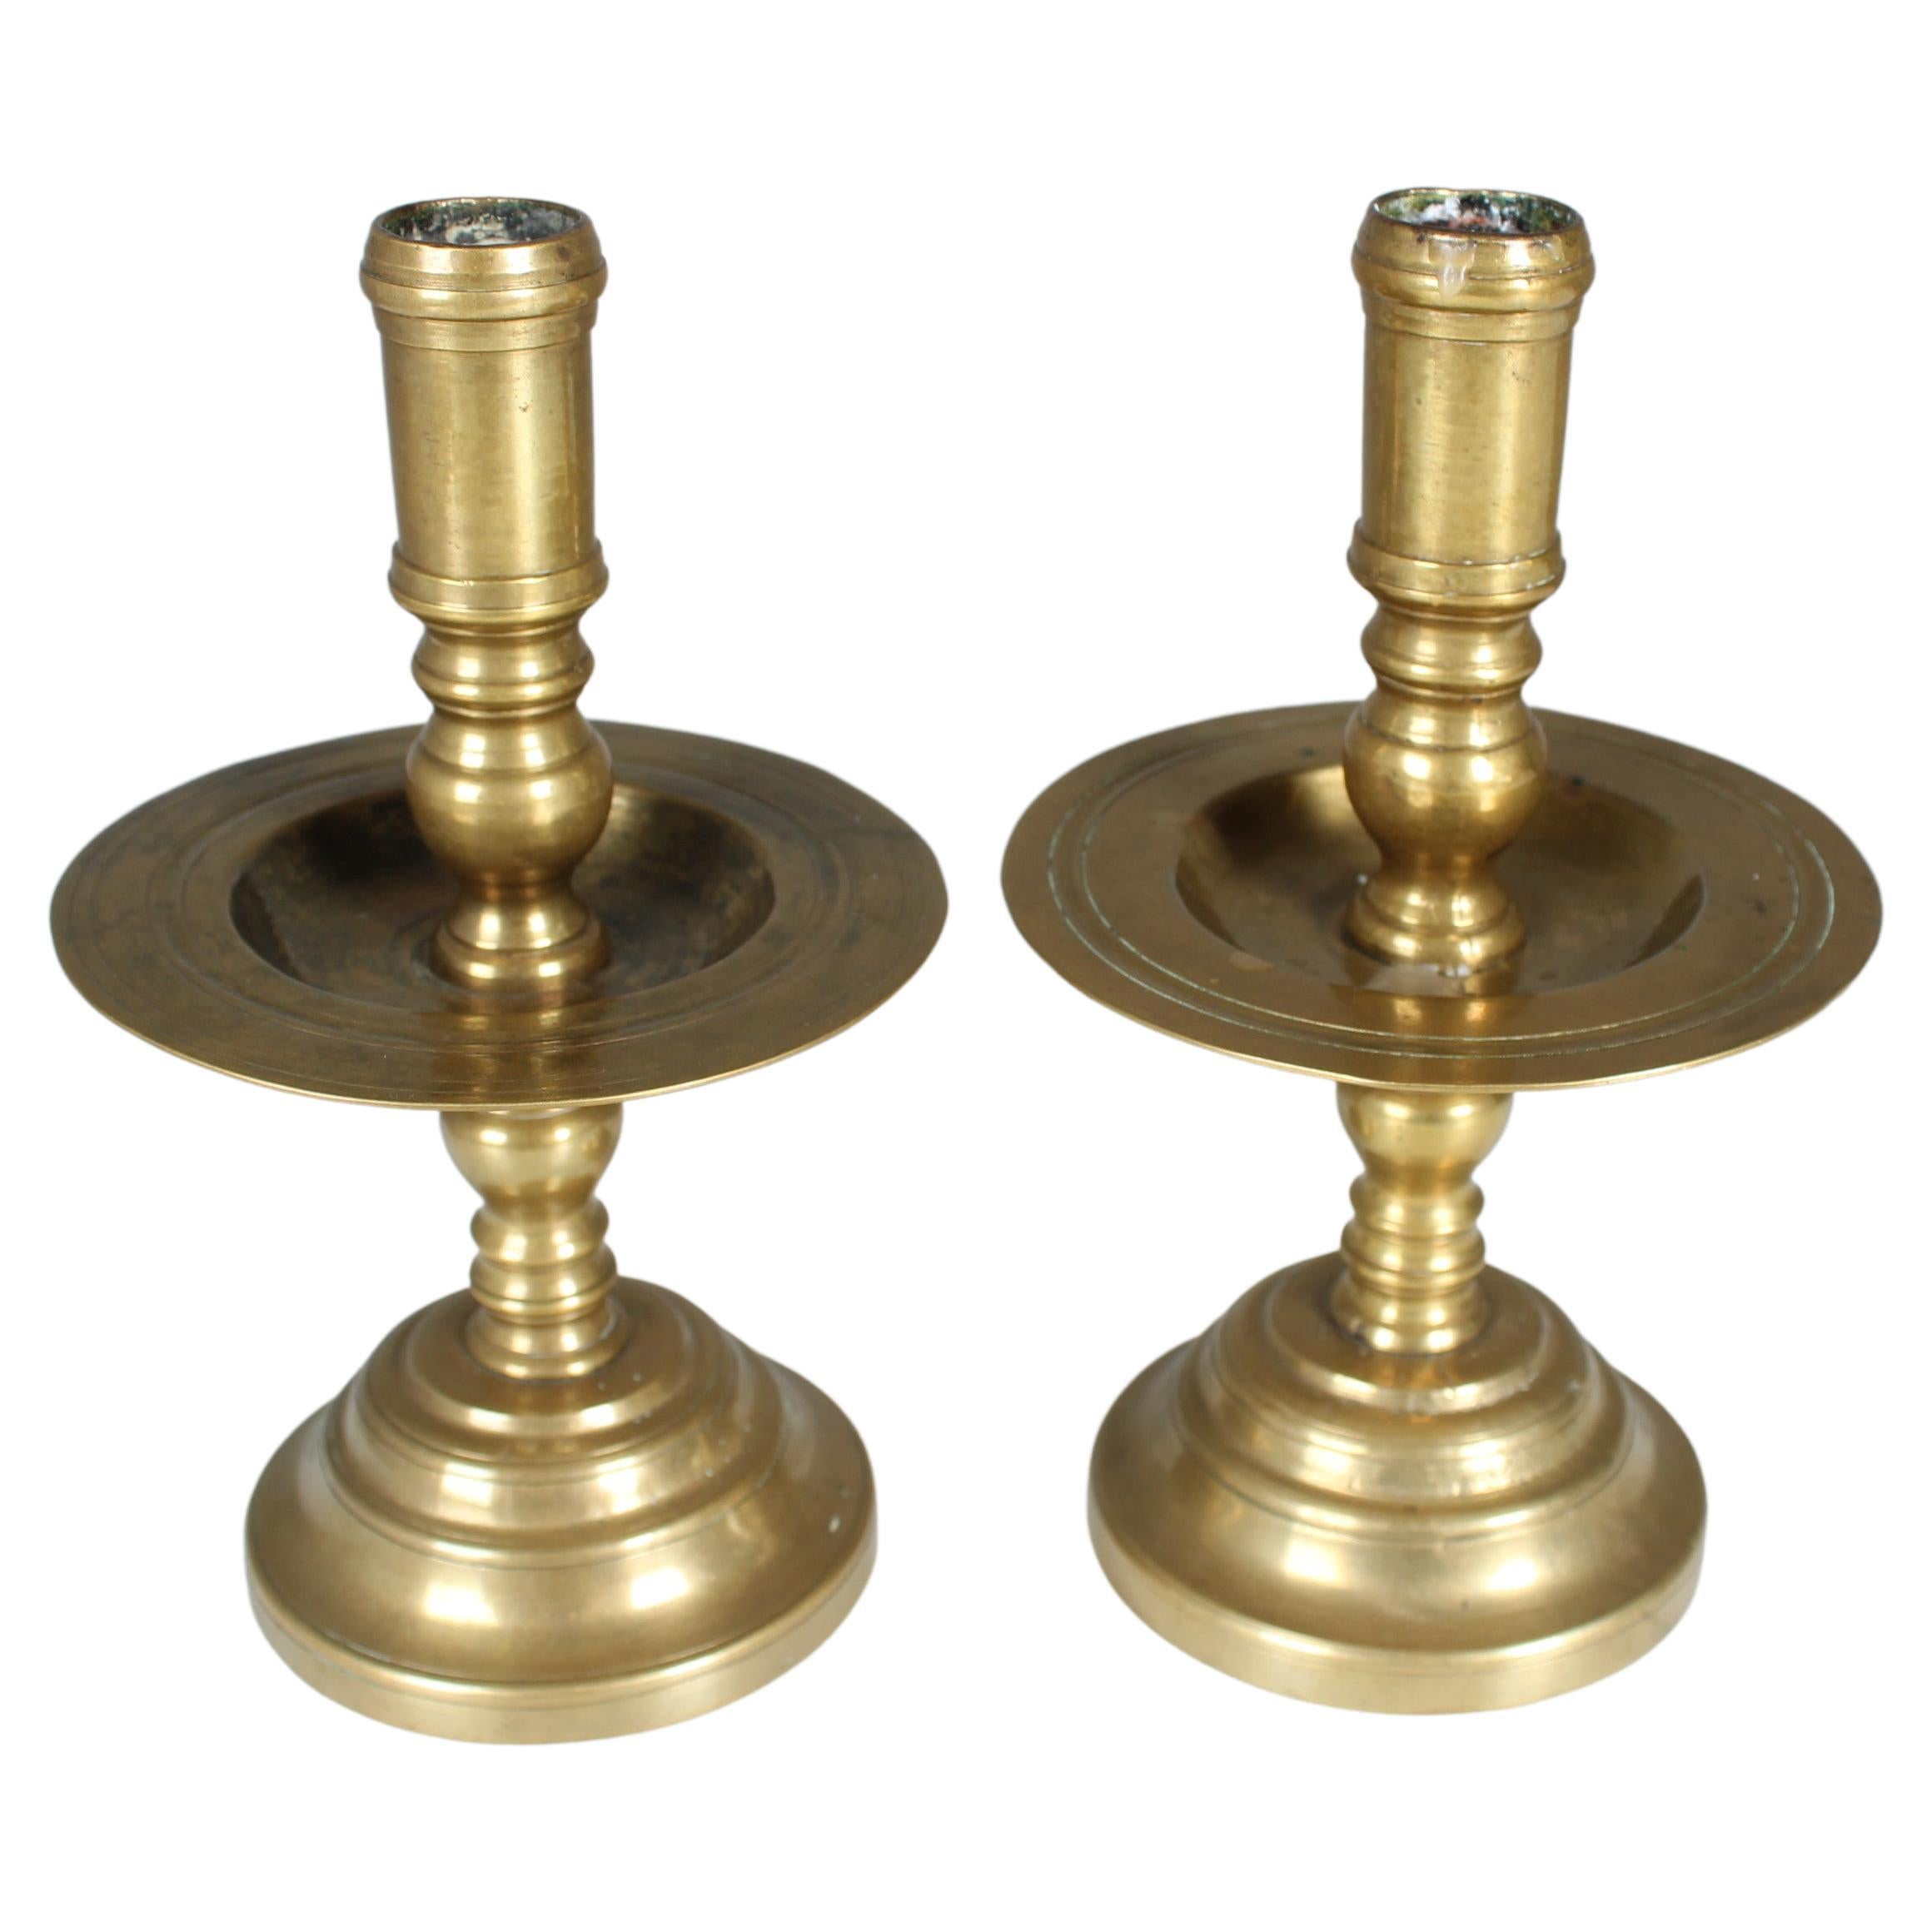 Pair of Antique Candlesticks, Brass, Gilded, Late 19th Century